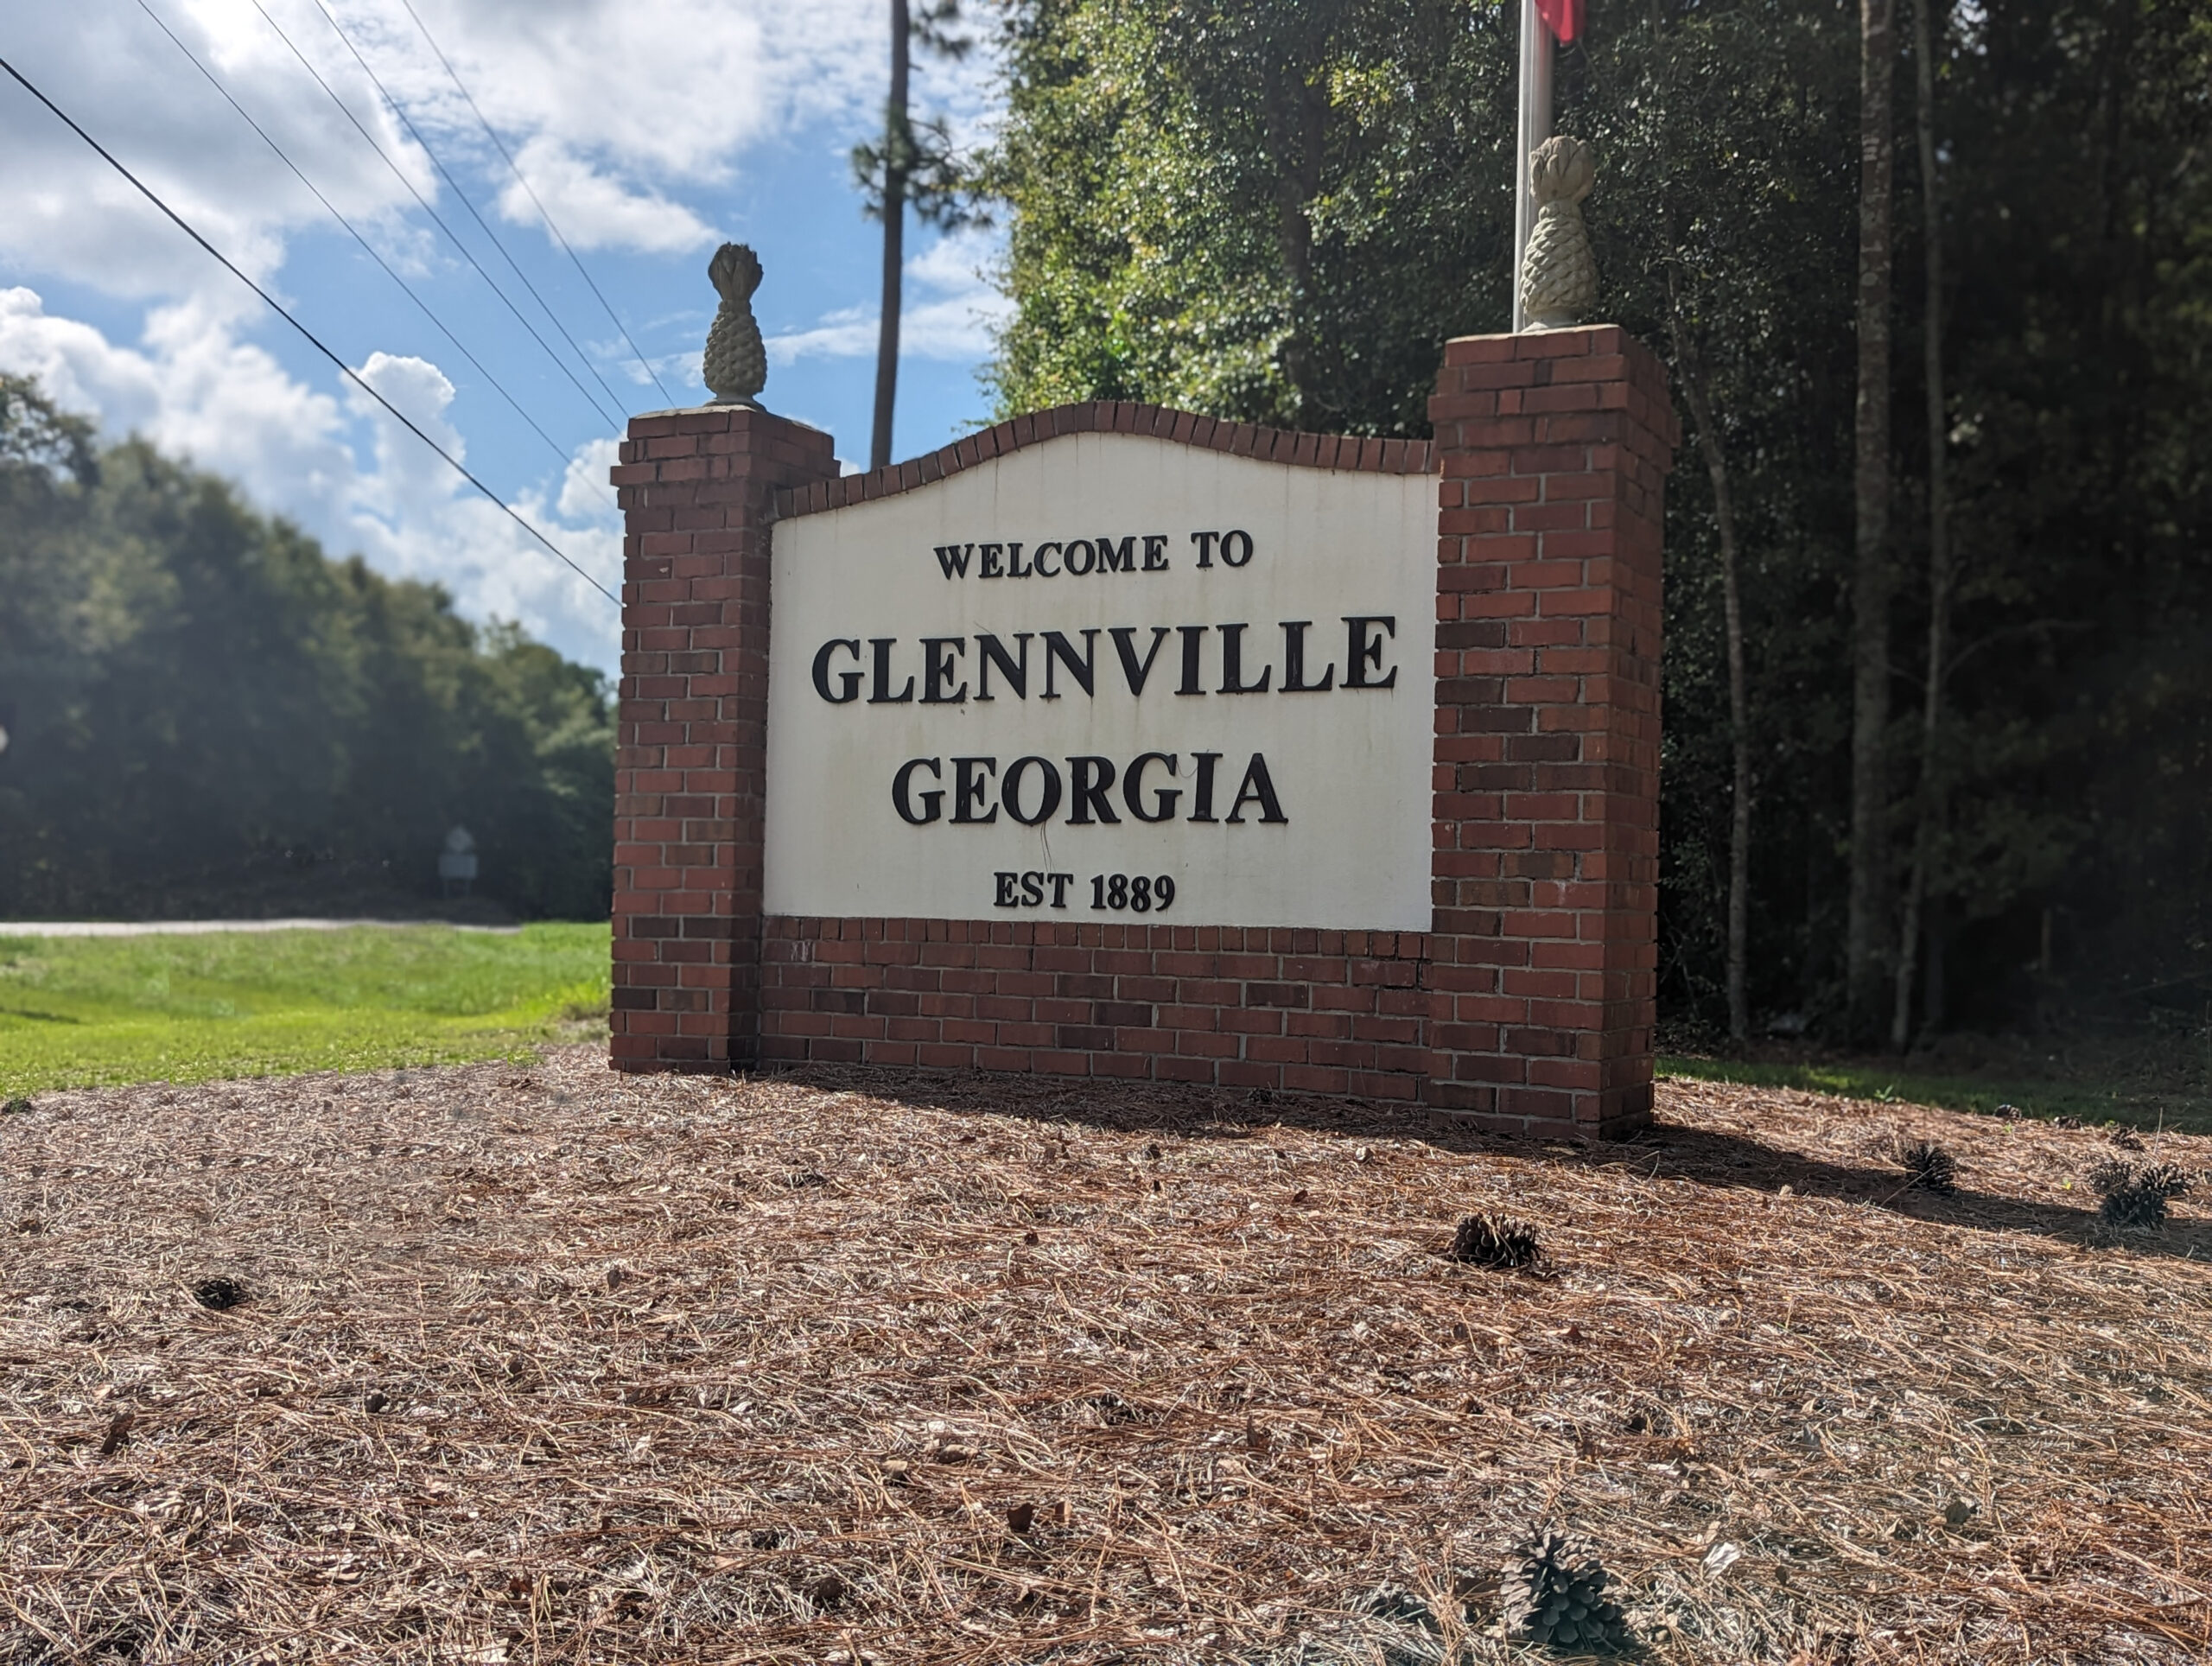 Welcome to Glennvillle Georgia brick sign